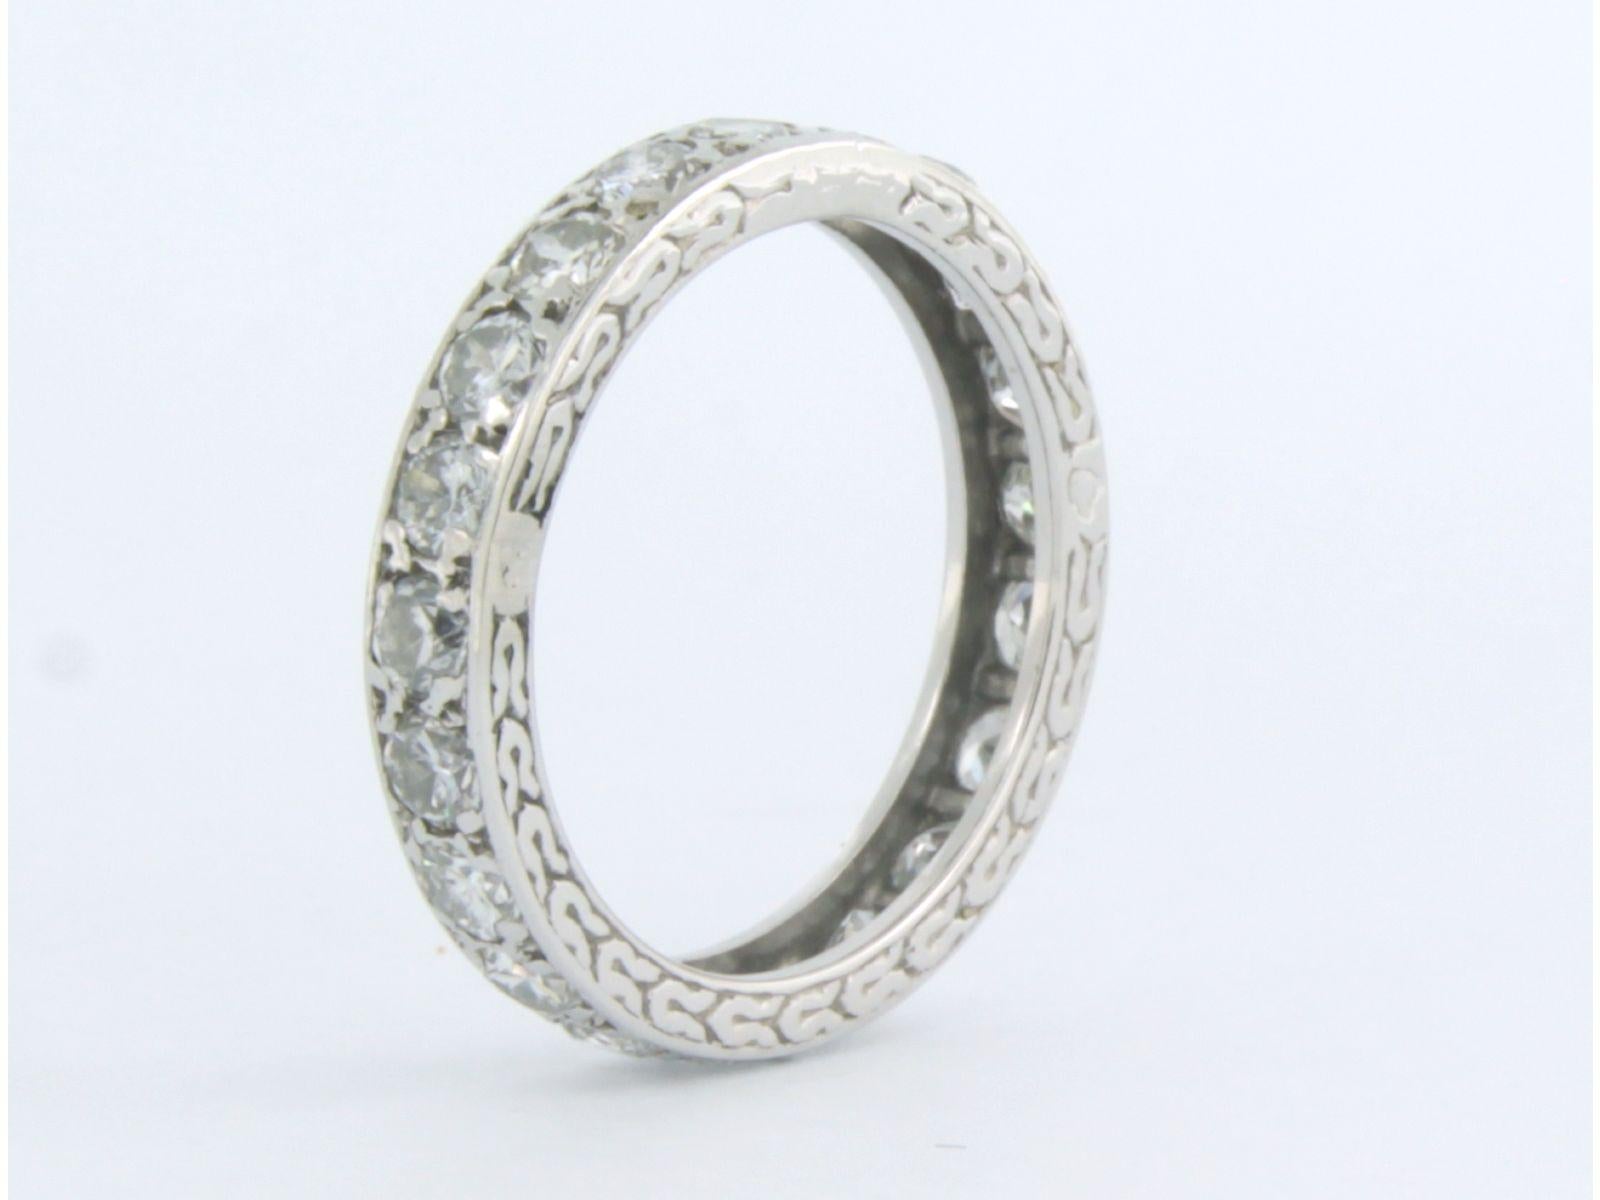 18k white gold eternity band set with old European cut diamond -1.80 ct - ring size US. 5 - EU. 15.75 (49)

detailed description

the top of the ring is 4.0 mm wide

ring size US 5 - EU. 15.75 (49)

weight 3.2 grams

set with

- 21 x 2.6 mm old